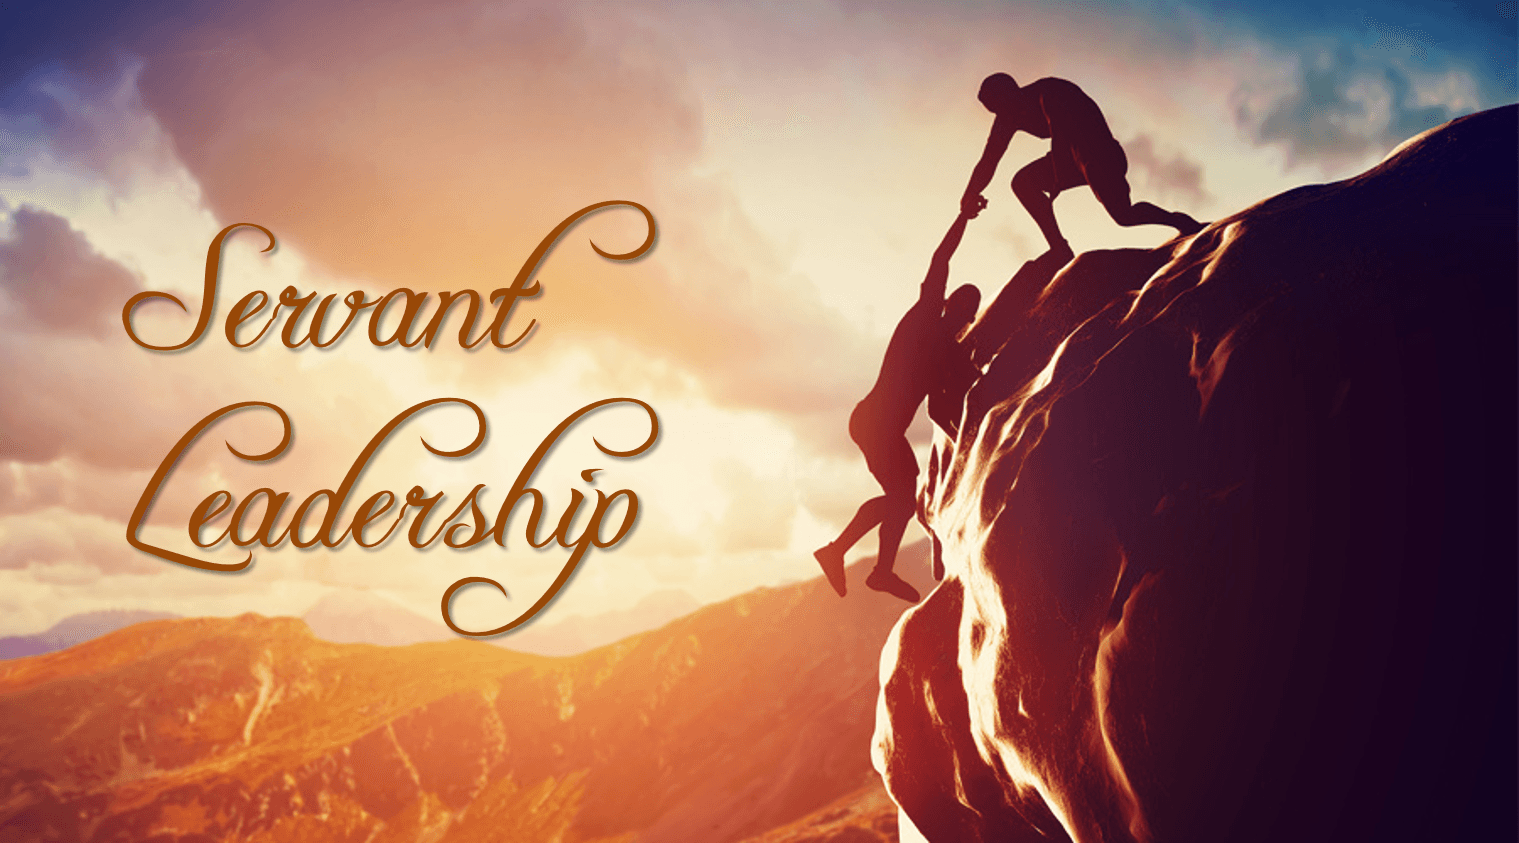 the servant as a leader essay